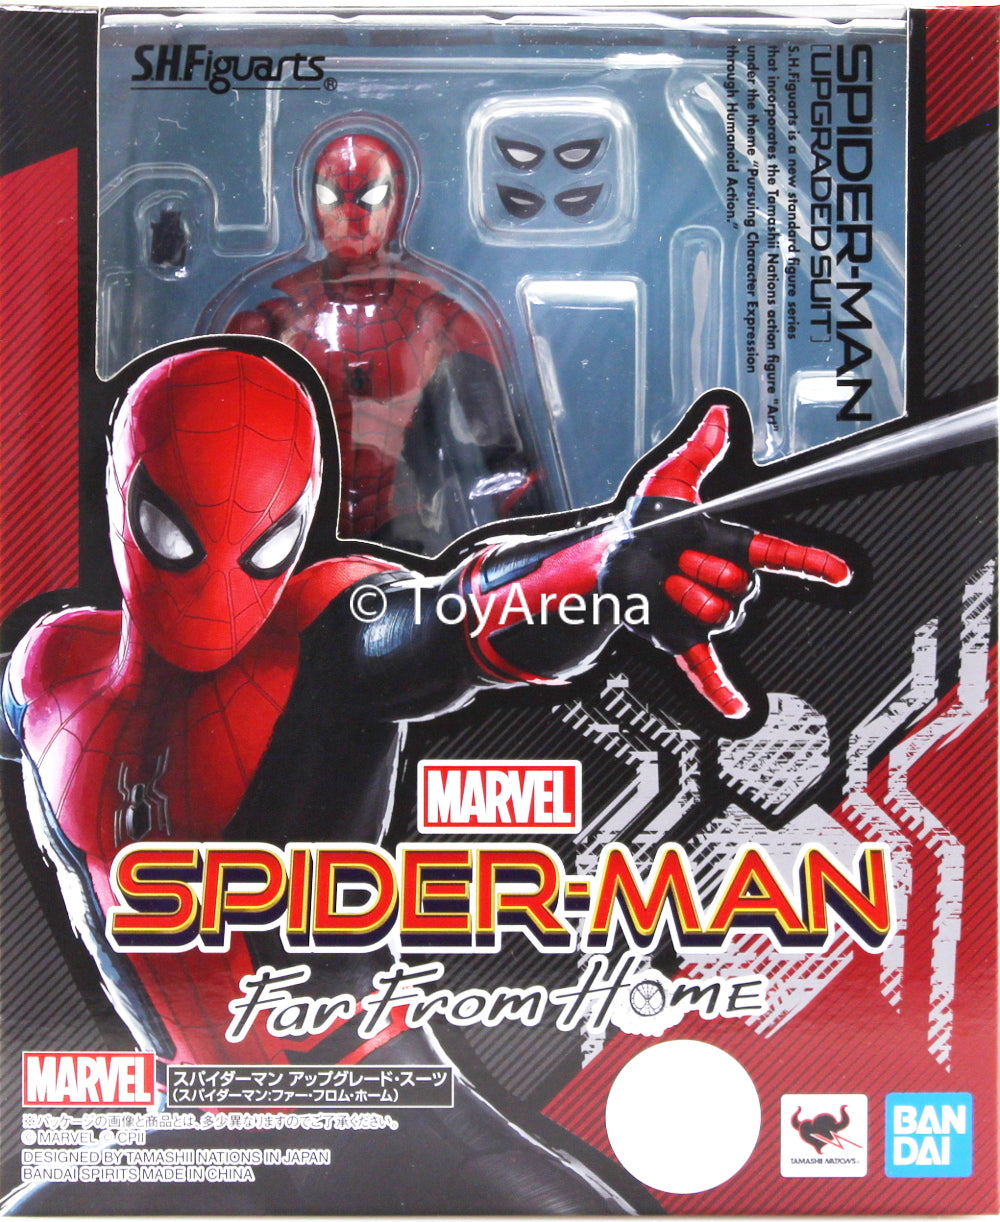 S.H. Figuarts Marvel Spiderman Far From Home - Spiderman Upgrade Suit